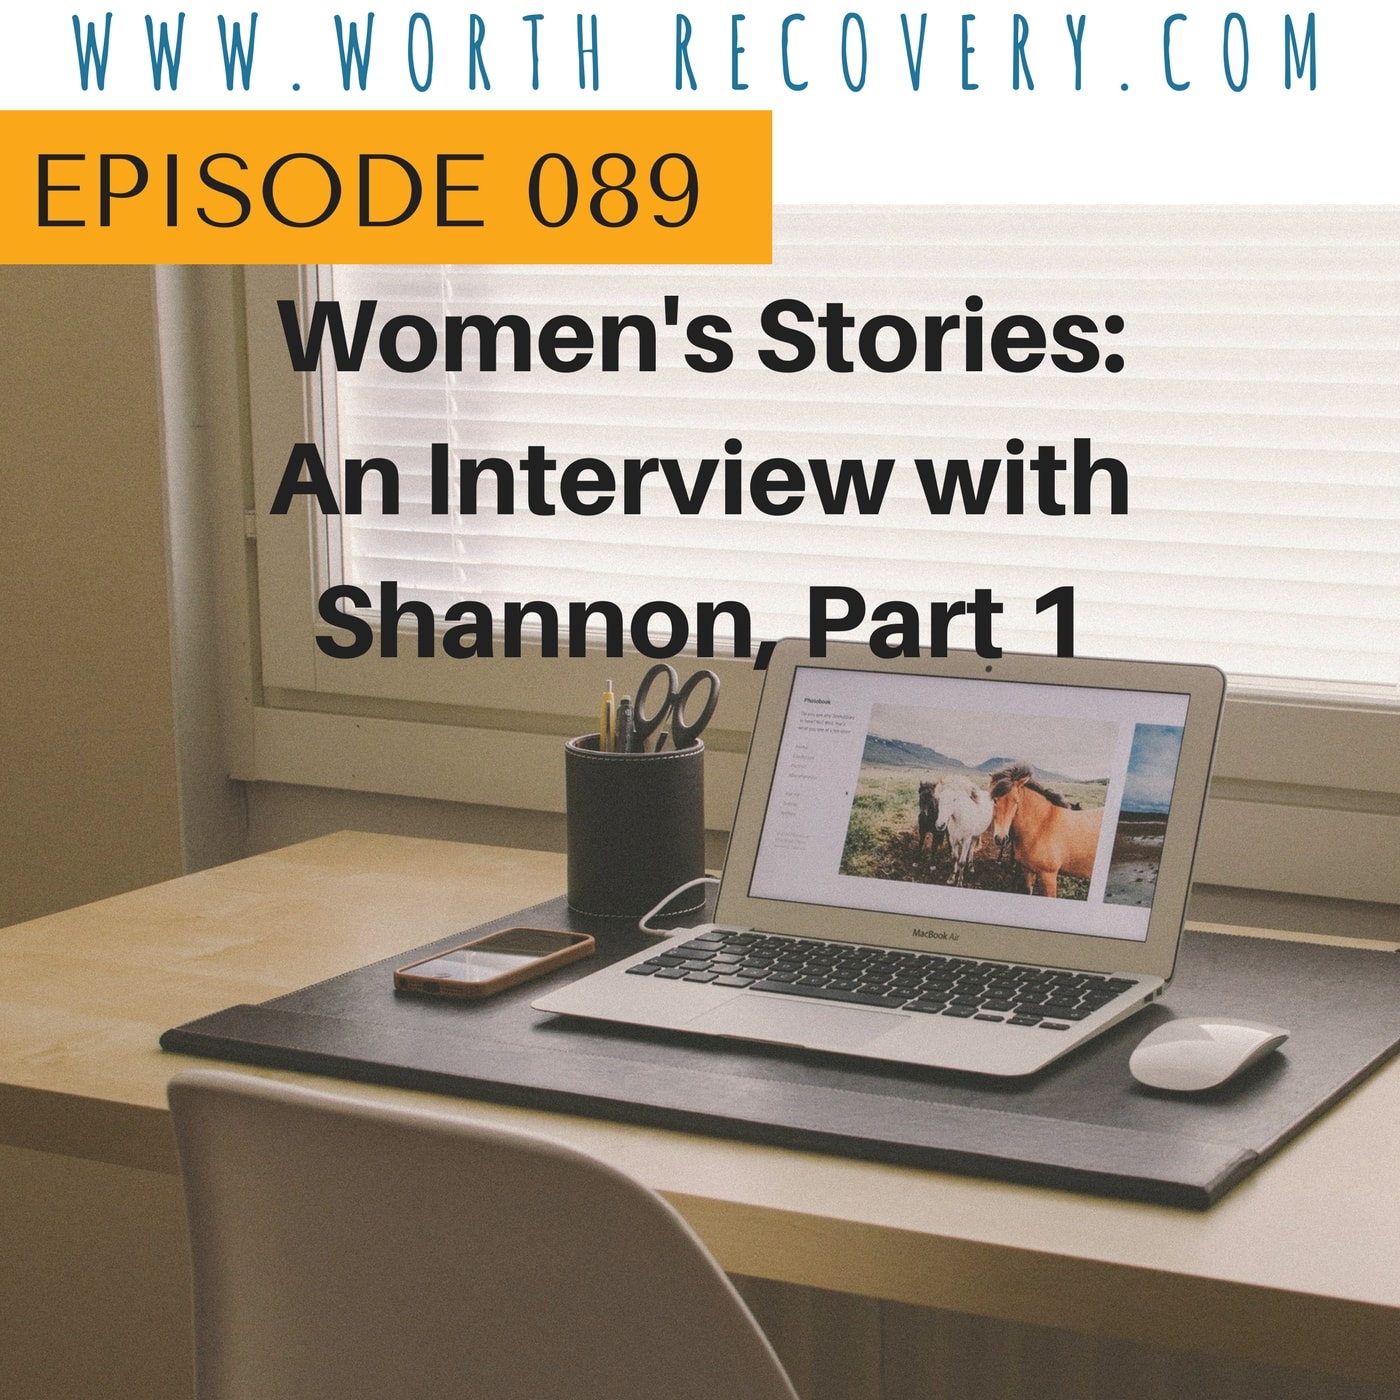 Episode 089: Women’s Stories - An Interview with Shannon, Part 1